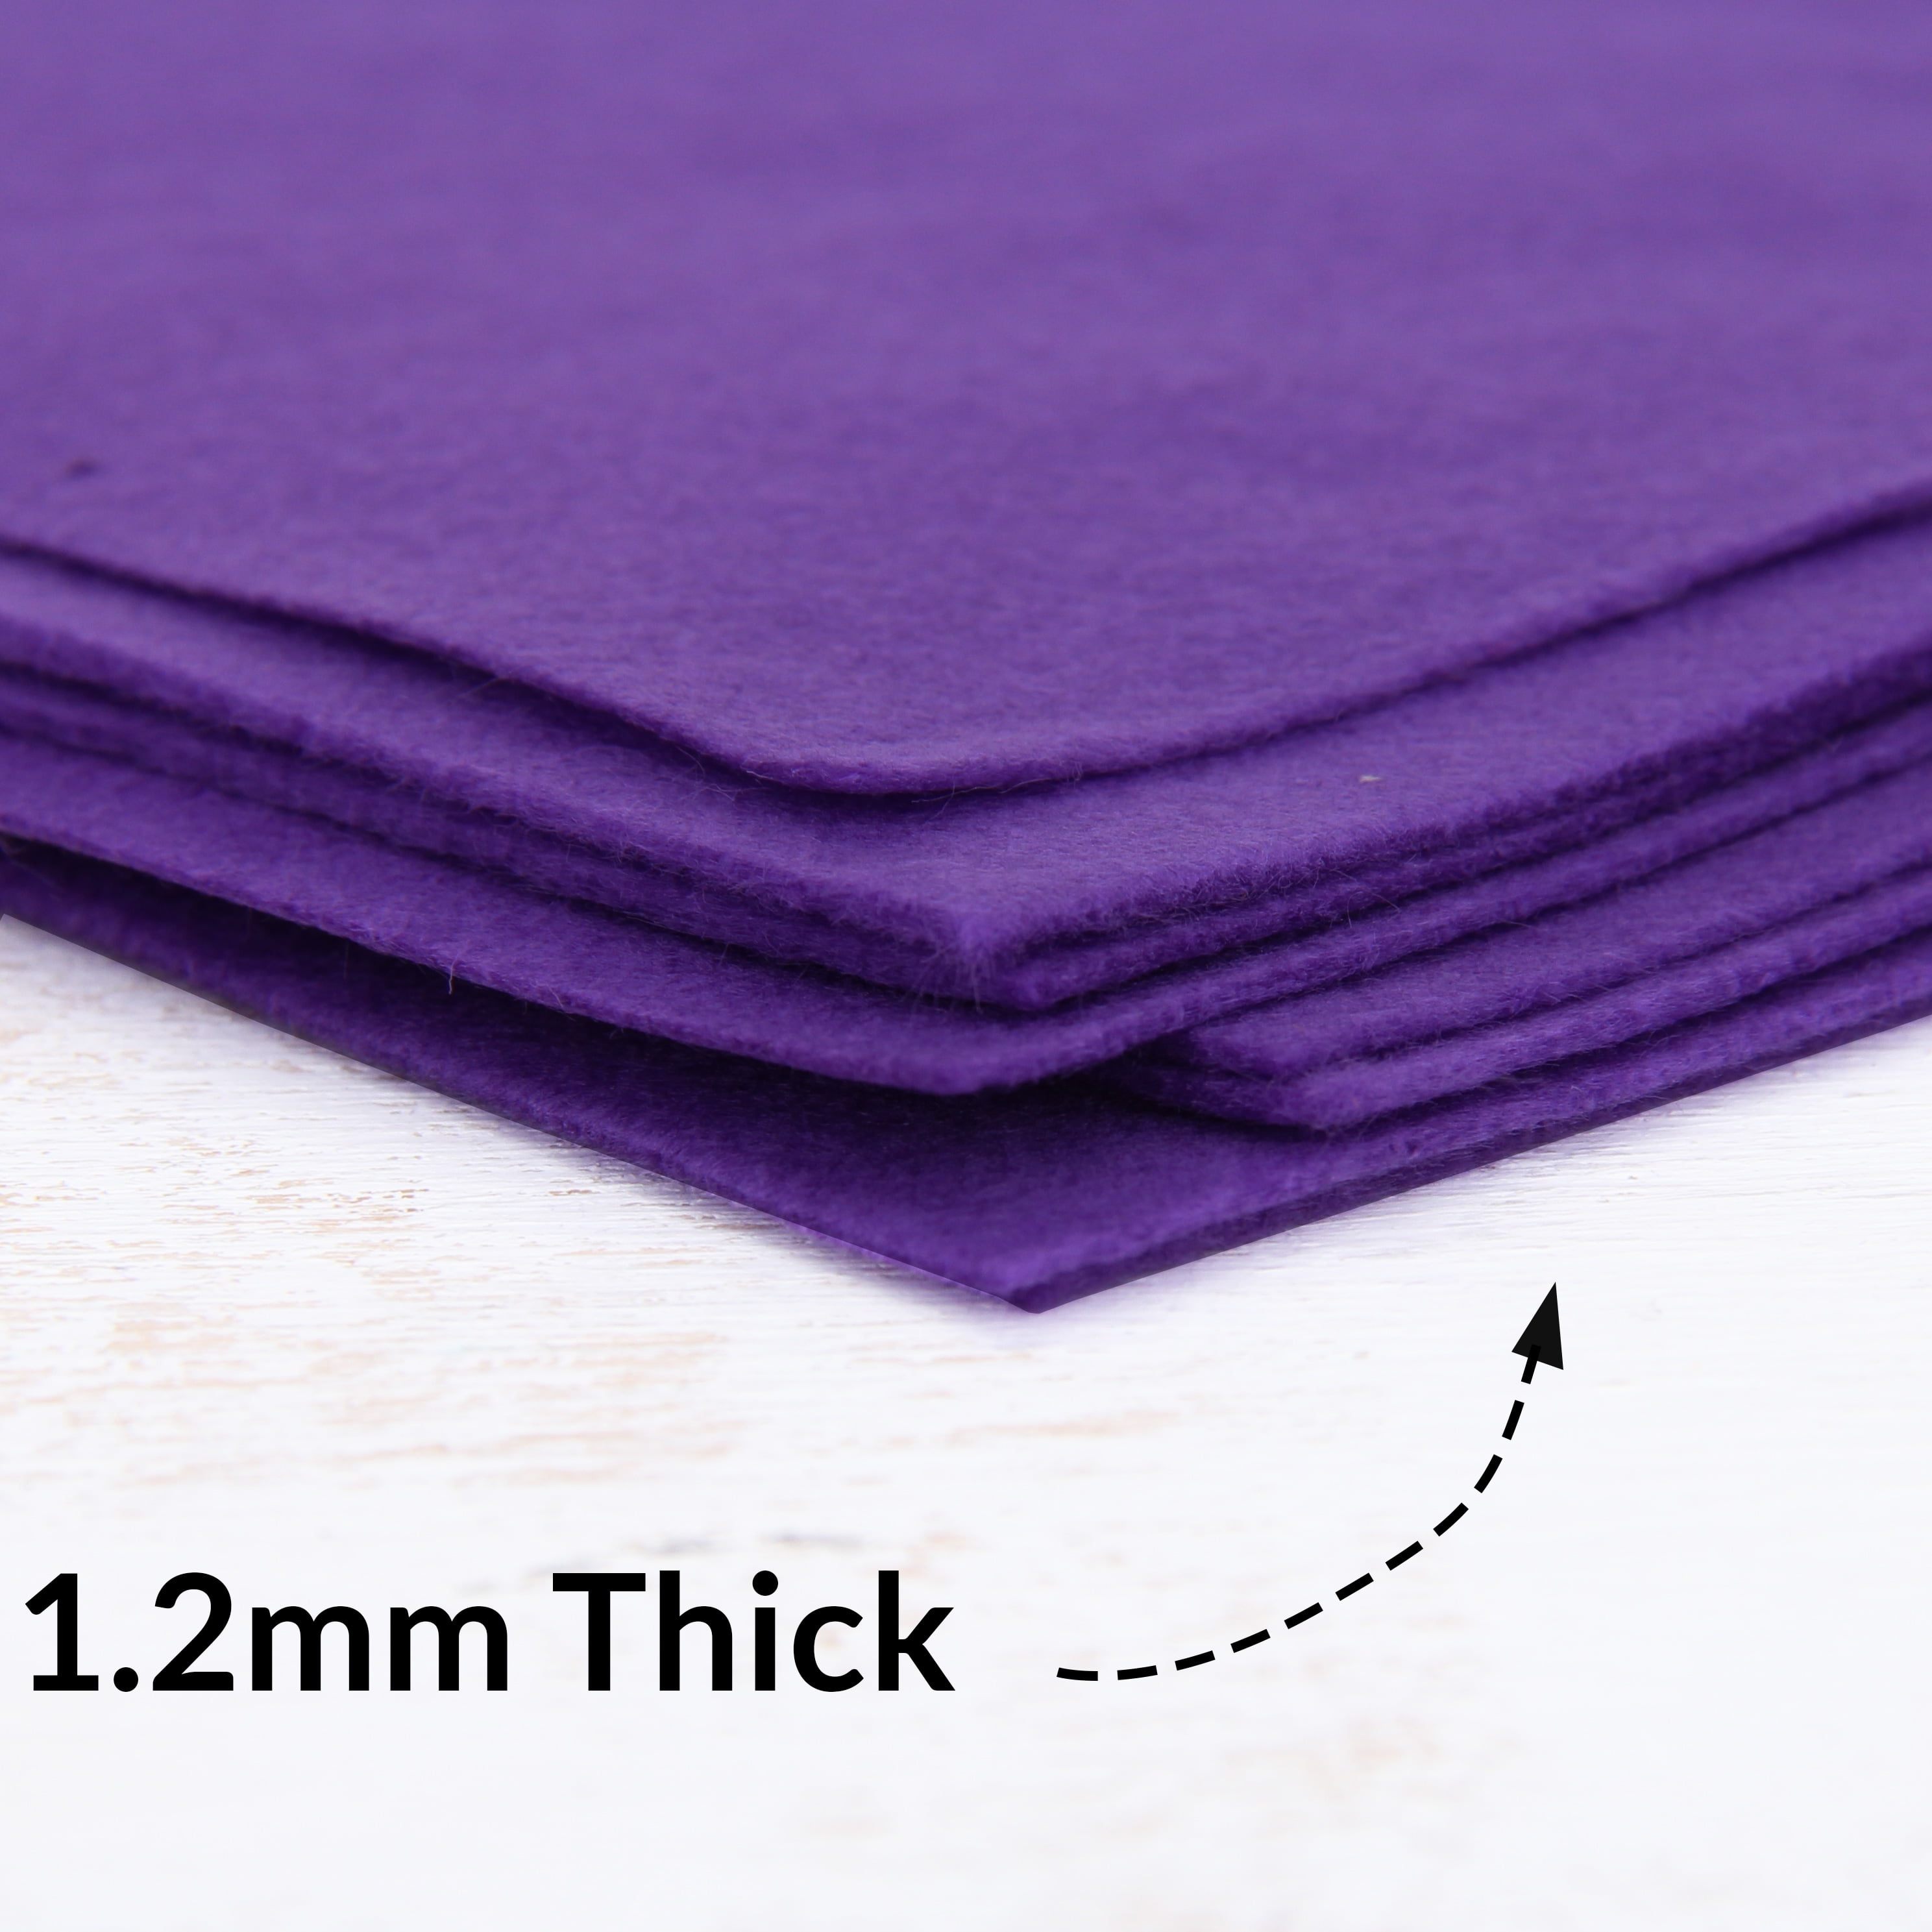 Threadart Premium Felt Sheets - 10 Sheets - 12 x 12 - Purple, Soft  Wool-Like Feel, 1.2mm Thick for DIY Crafts, Sewing, Crafting Projects